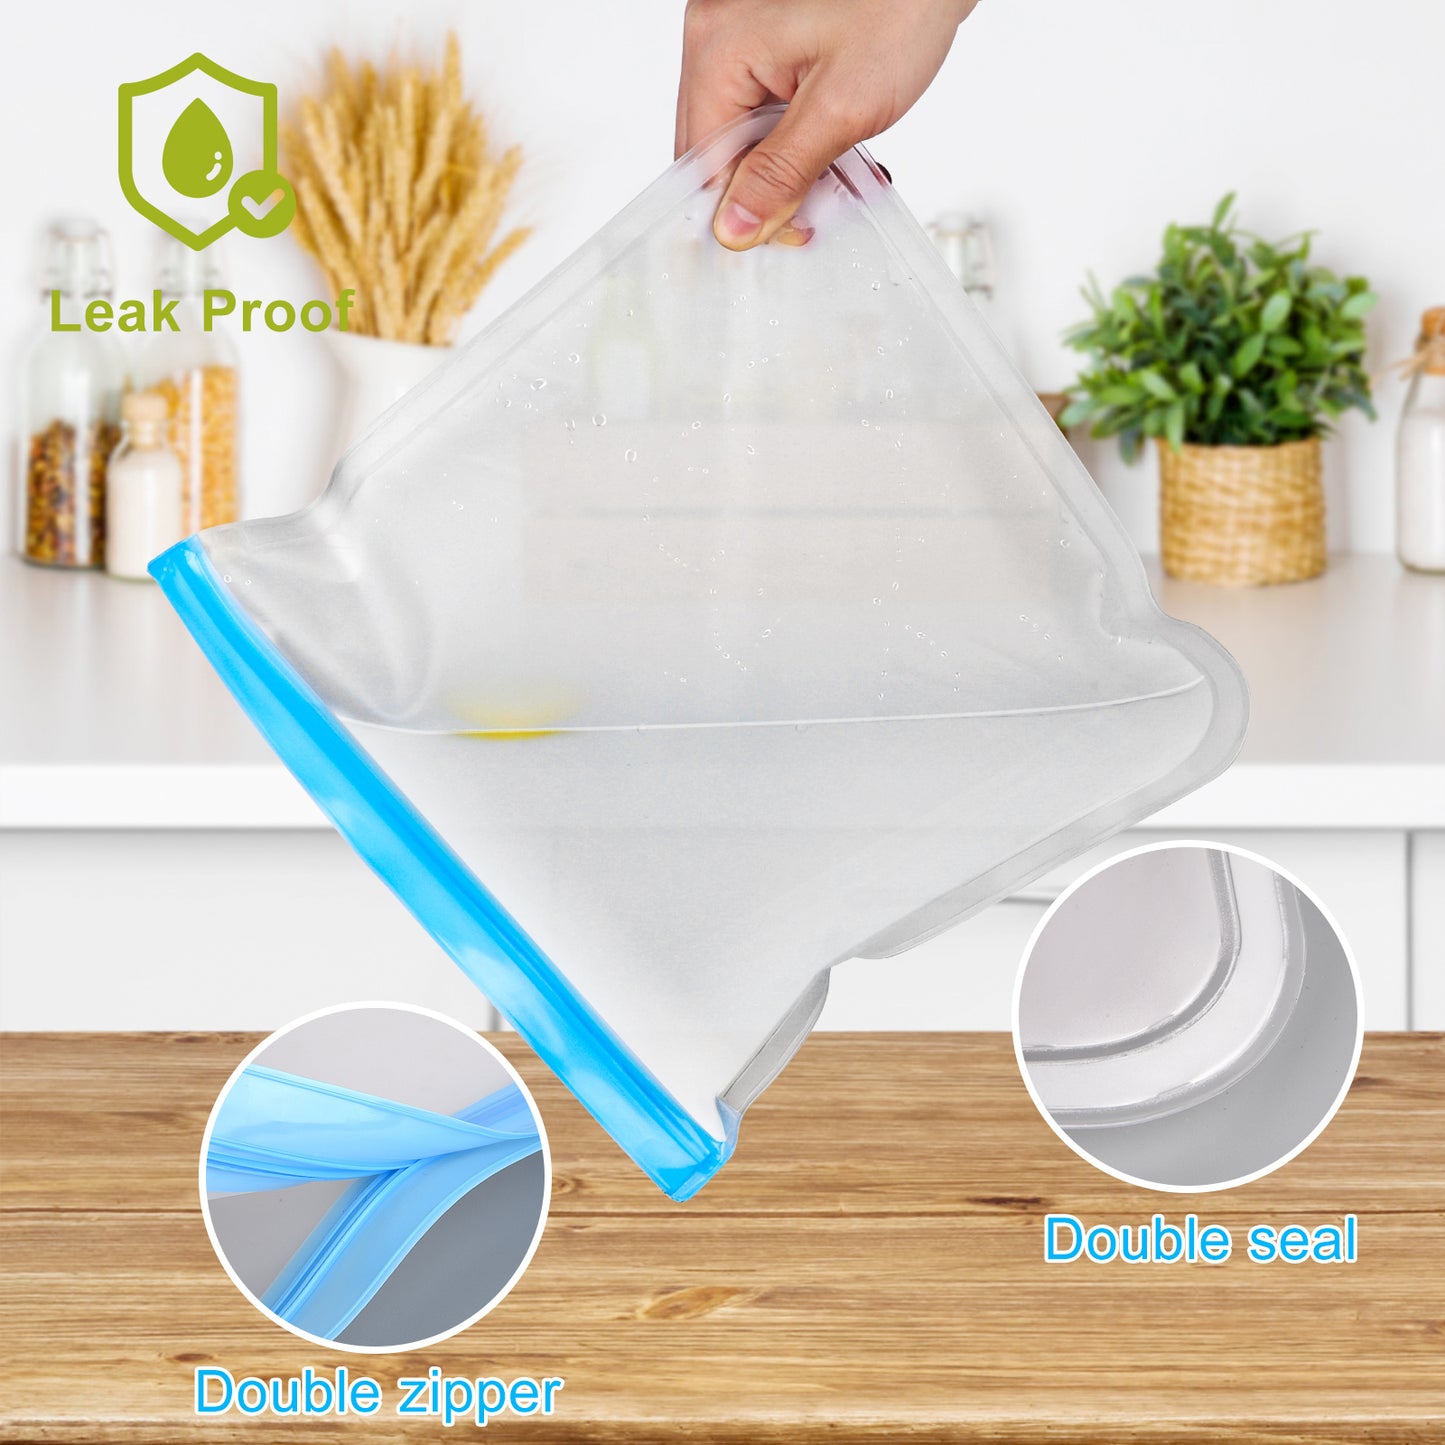  Reusable Silicone Food Storage Bags 4 Pack of Silicone